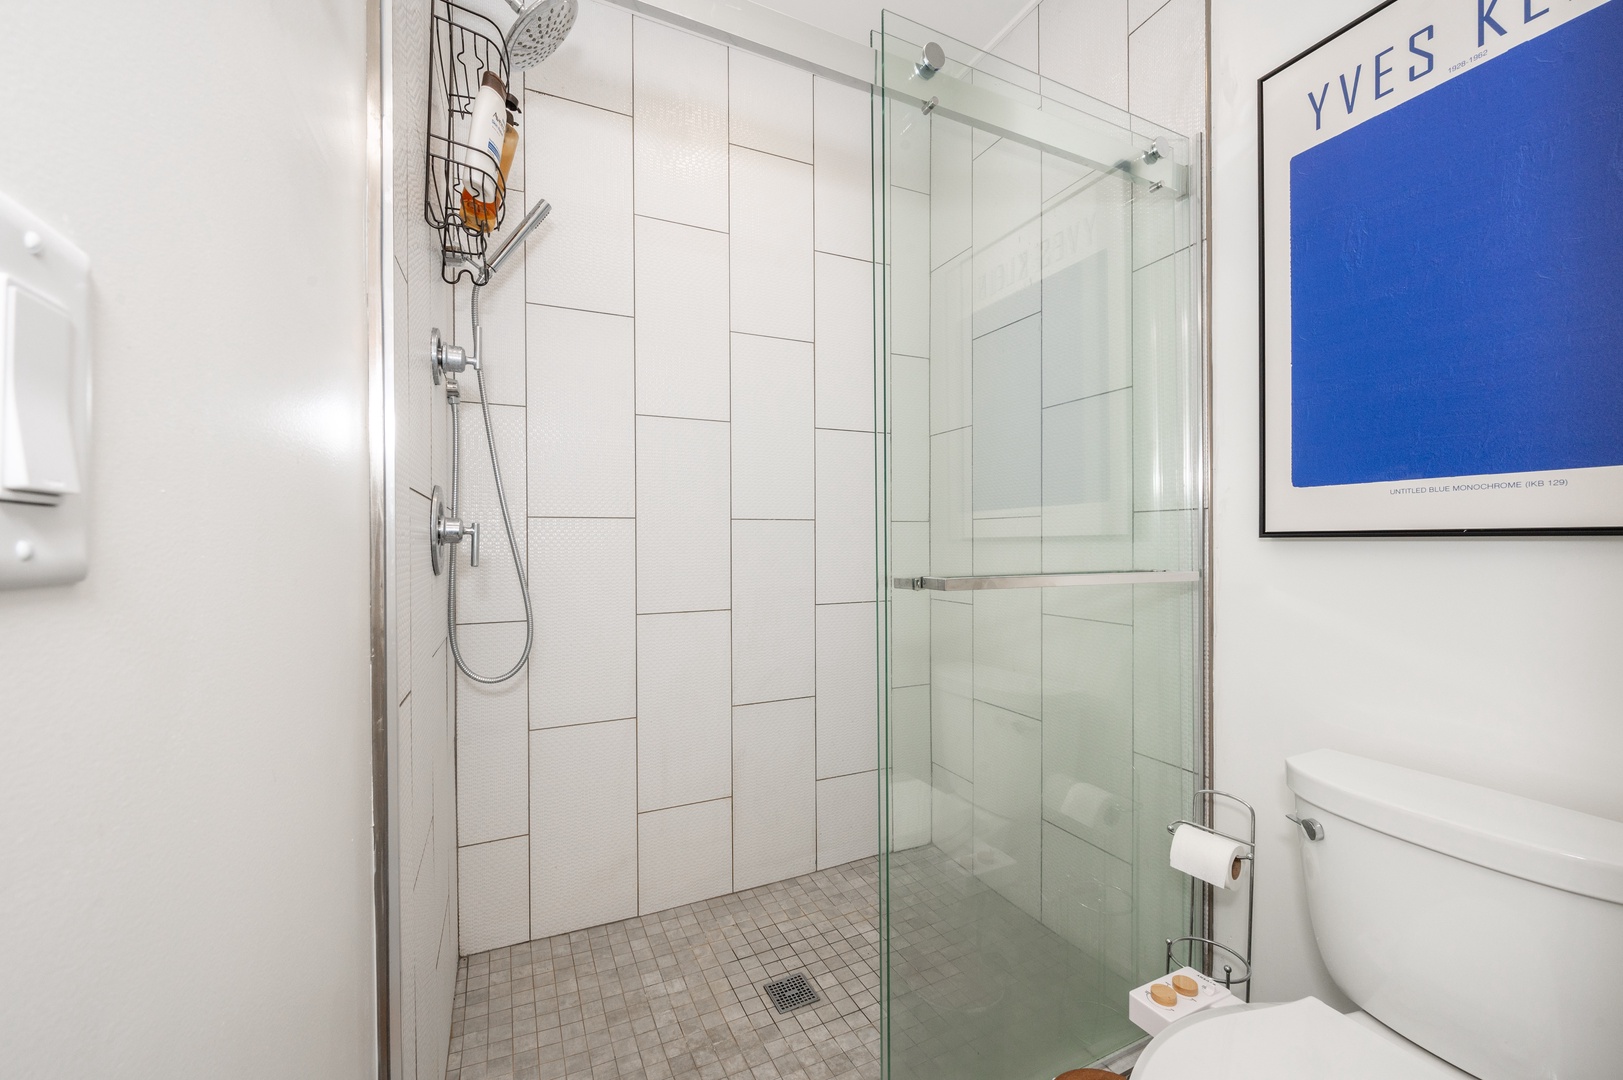 Enjoy a large double vanity & spa-like glass shower in the king ensuite bath